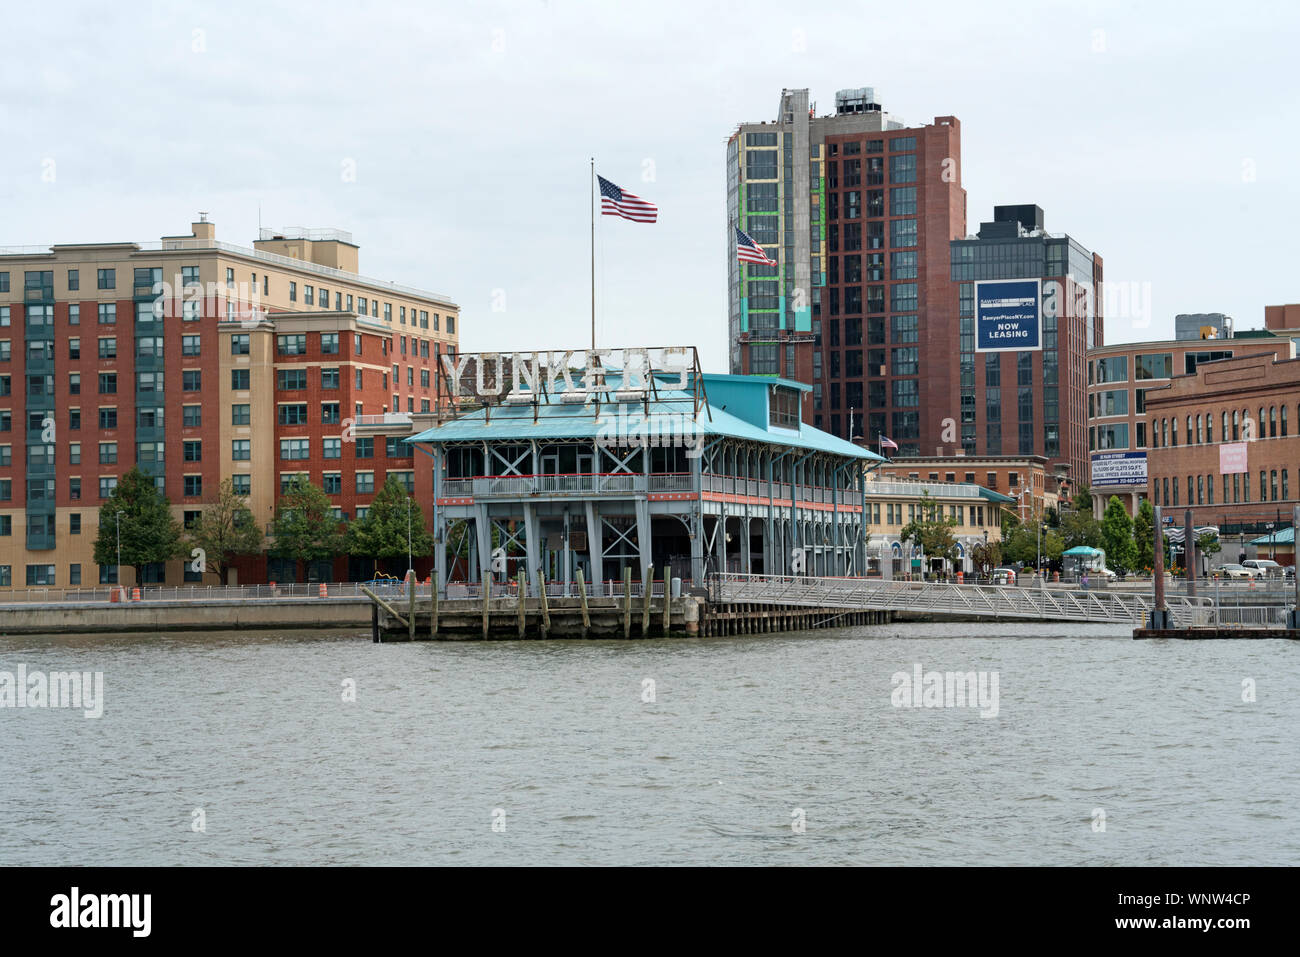 The Yonkers Municipal Pier on the Hudson River is more than 100 years old. Apartment buildings are rising around it in a formerly industrial area. Stock Photo